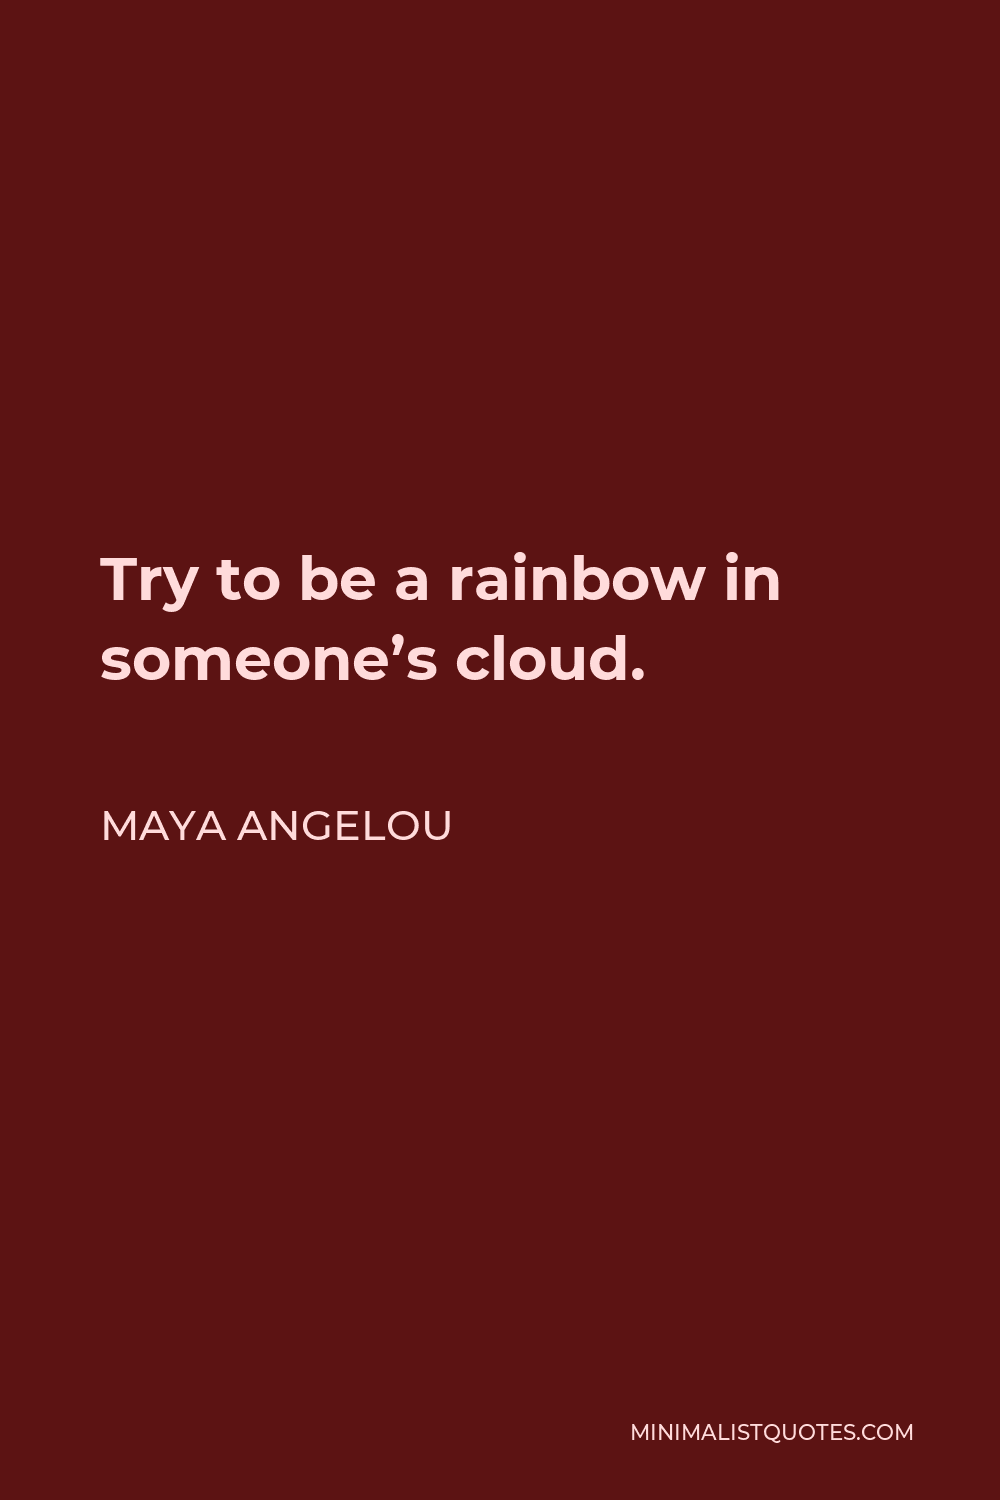 Maya Angelou Quote - Try to be a rainbow in someone’s cloud.